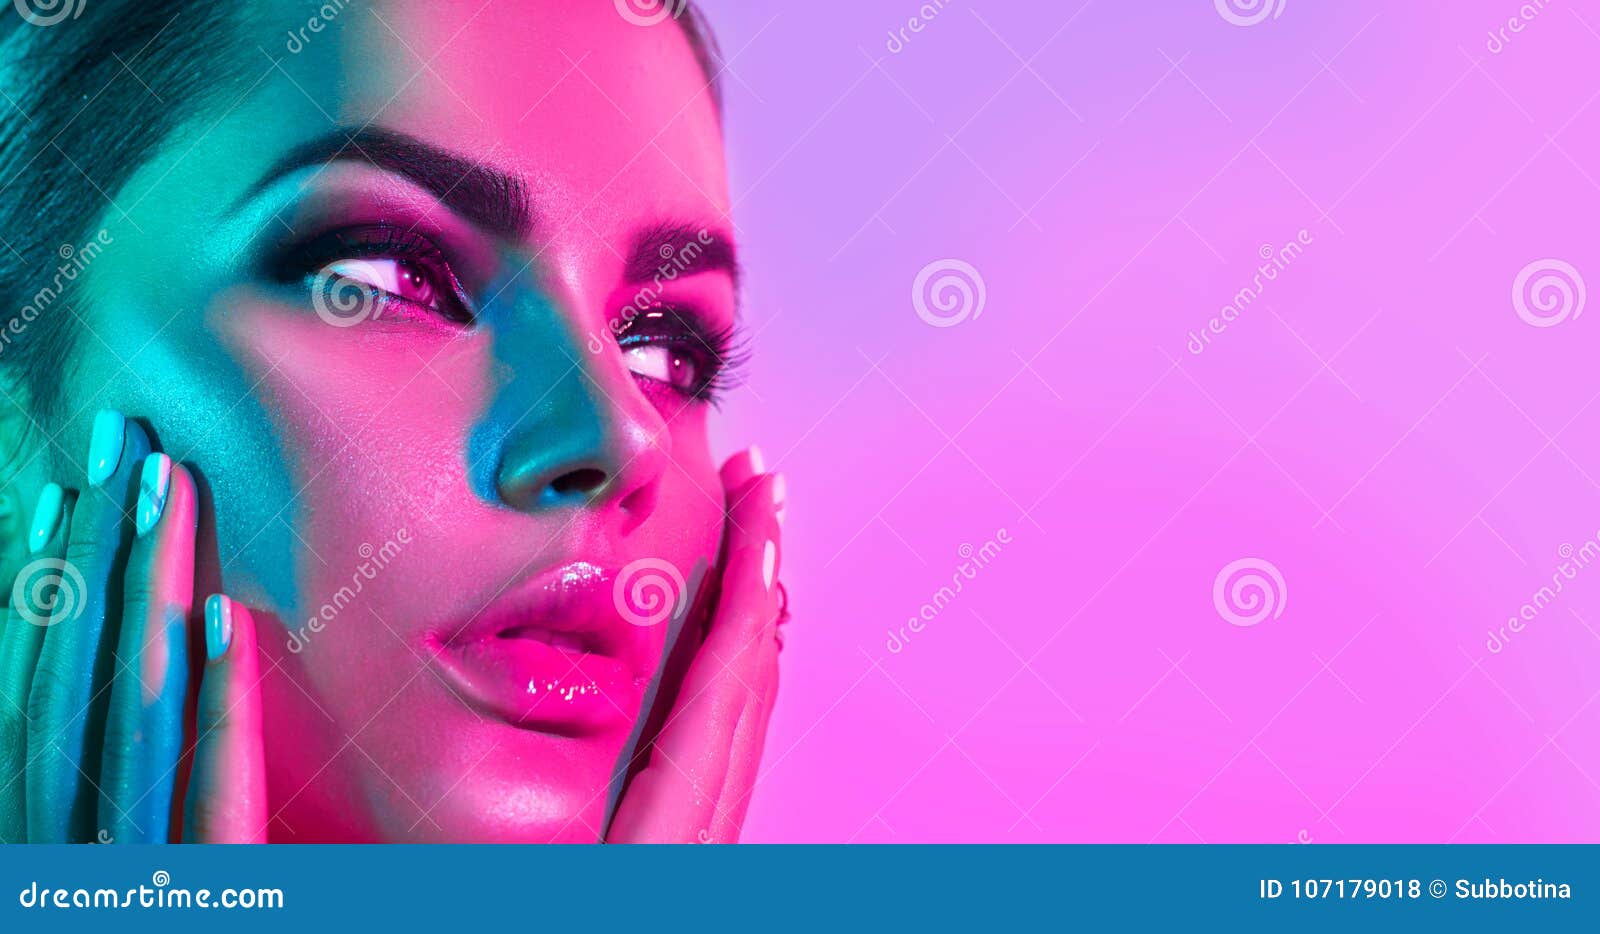 fashion model woman in colorful bright lights with trendy makeup and manicure